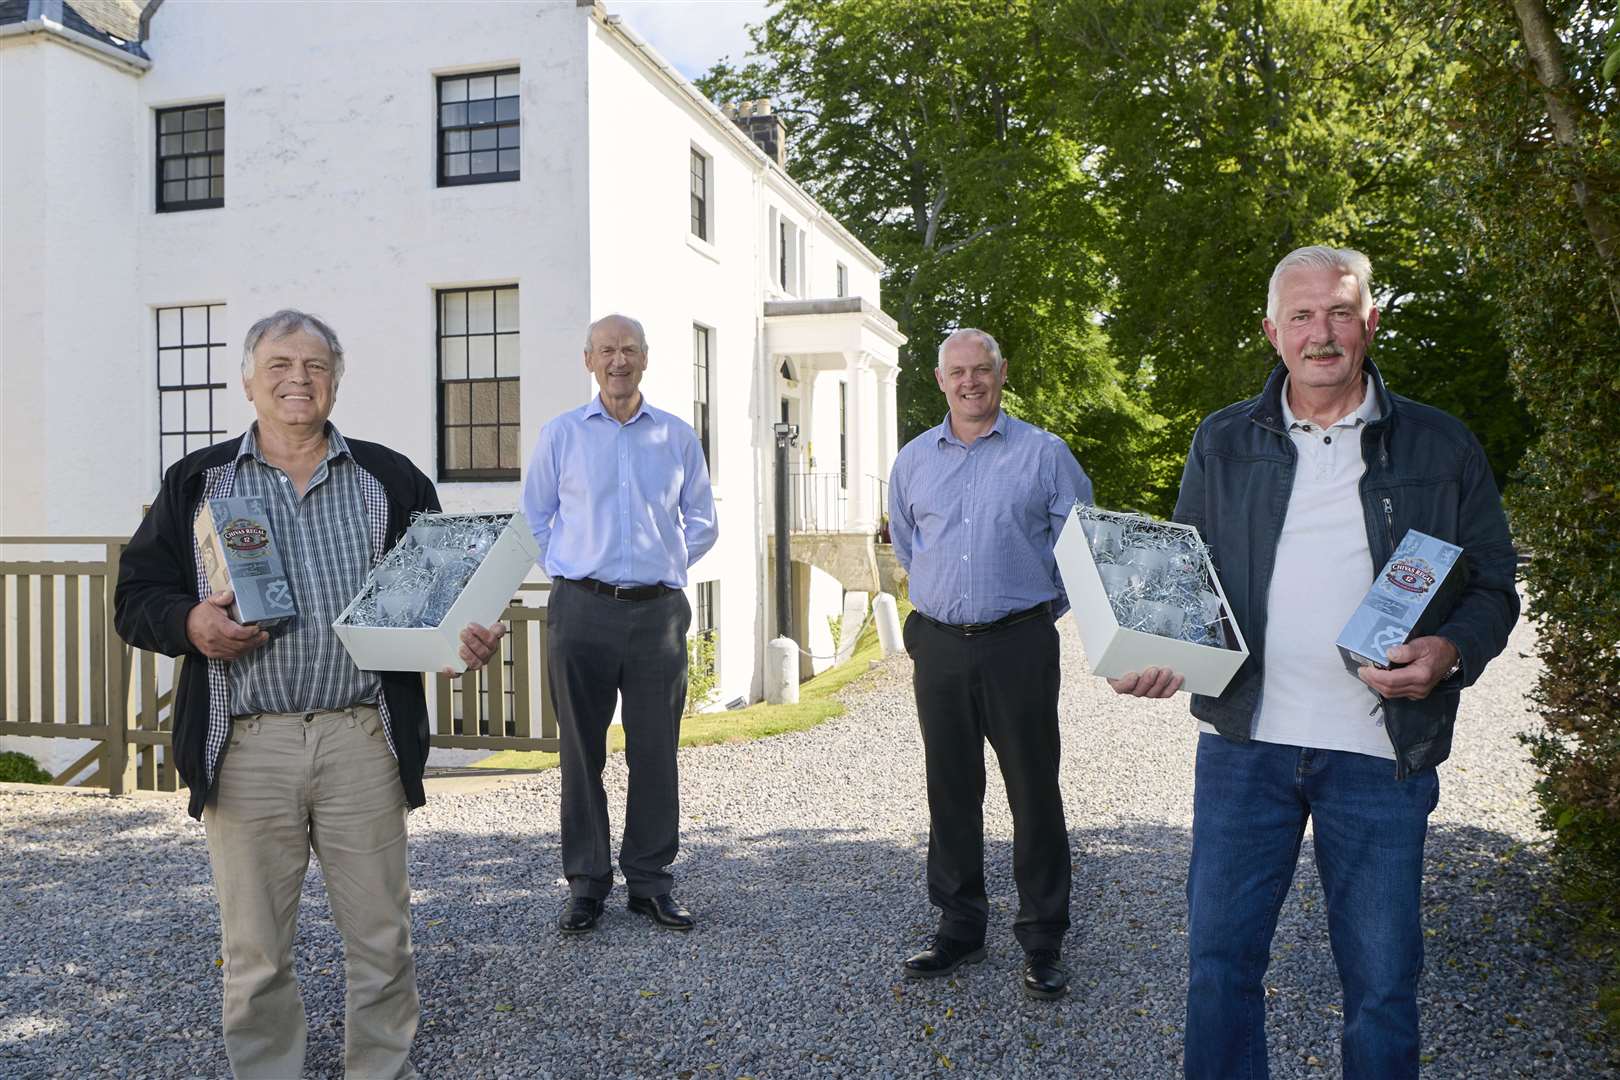 Retirees Michael Strachan (extreme left) and Angie Mackenzie (right) with Tulloch chief executive George Fraser (centre left) and joinery manager Hugh MacGillivray